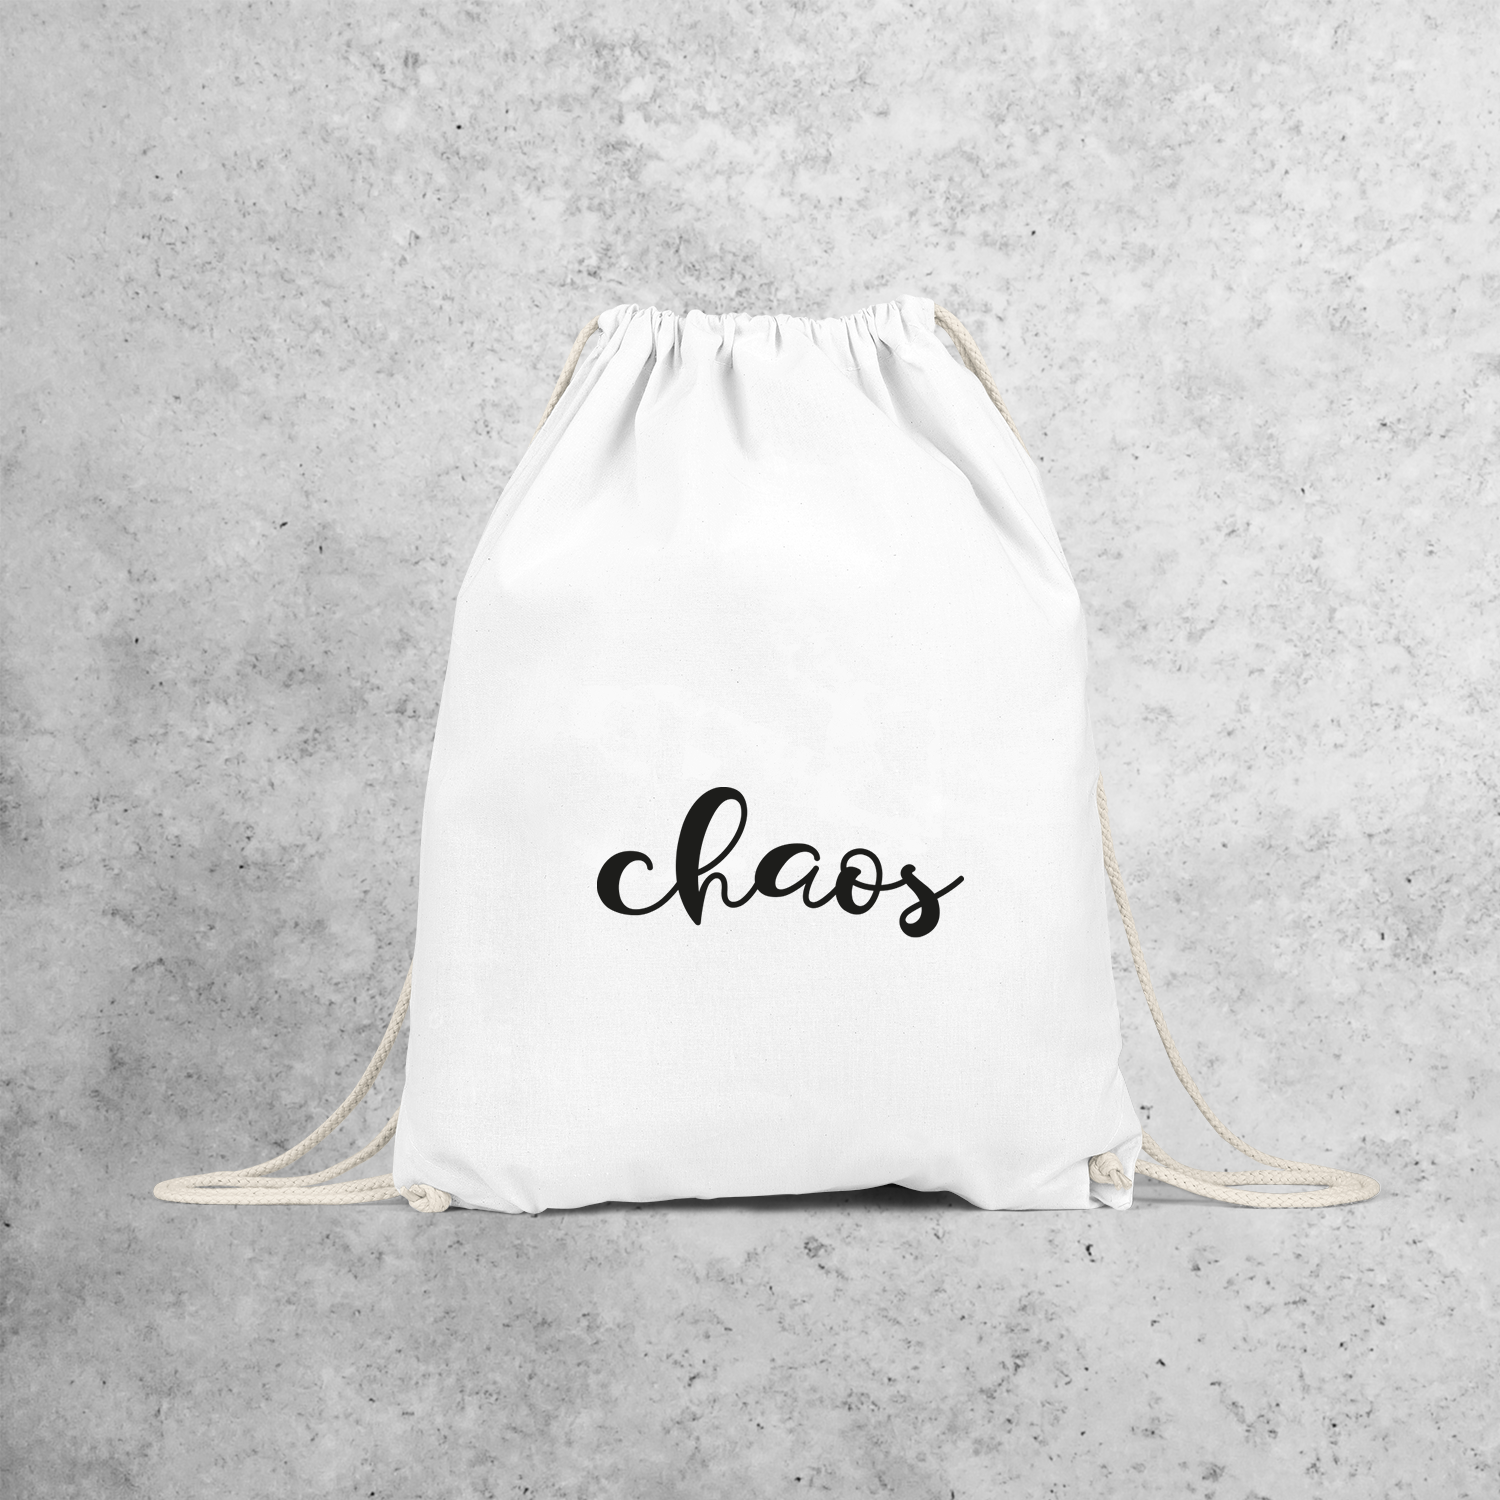 'Chaos' backpack